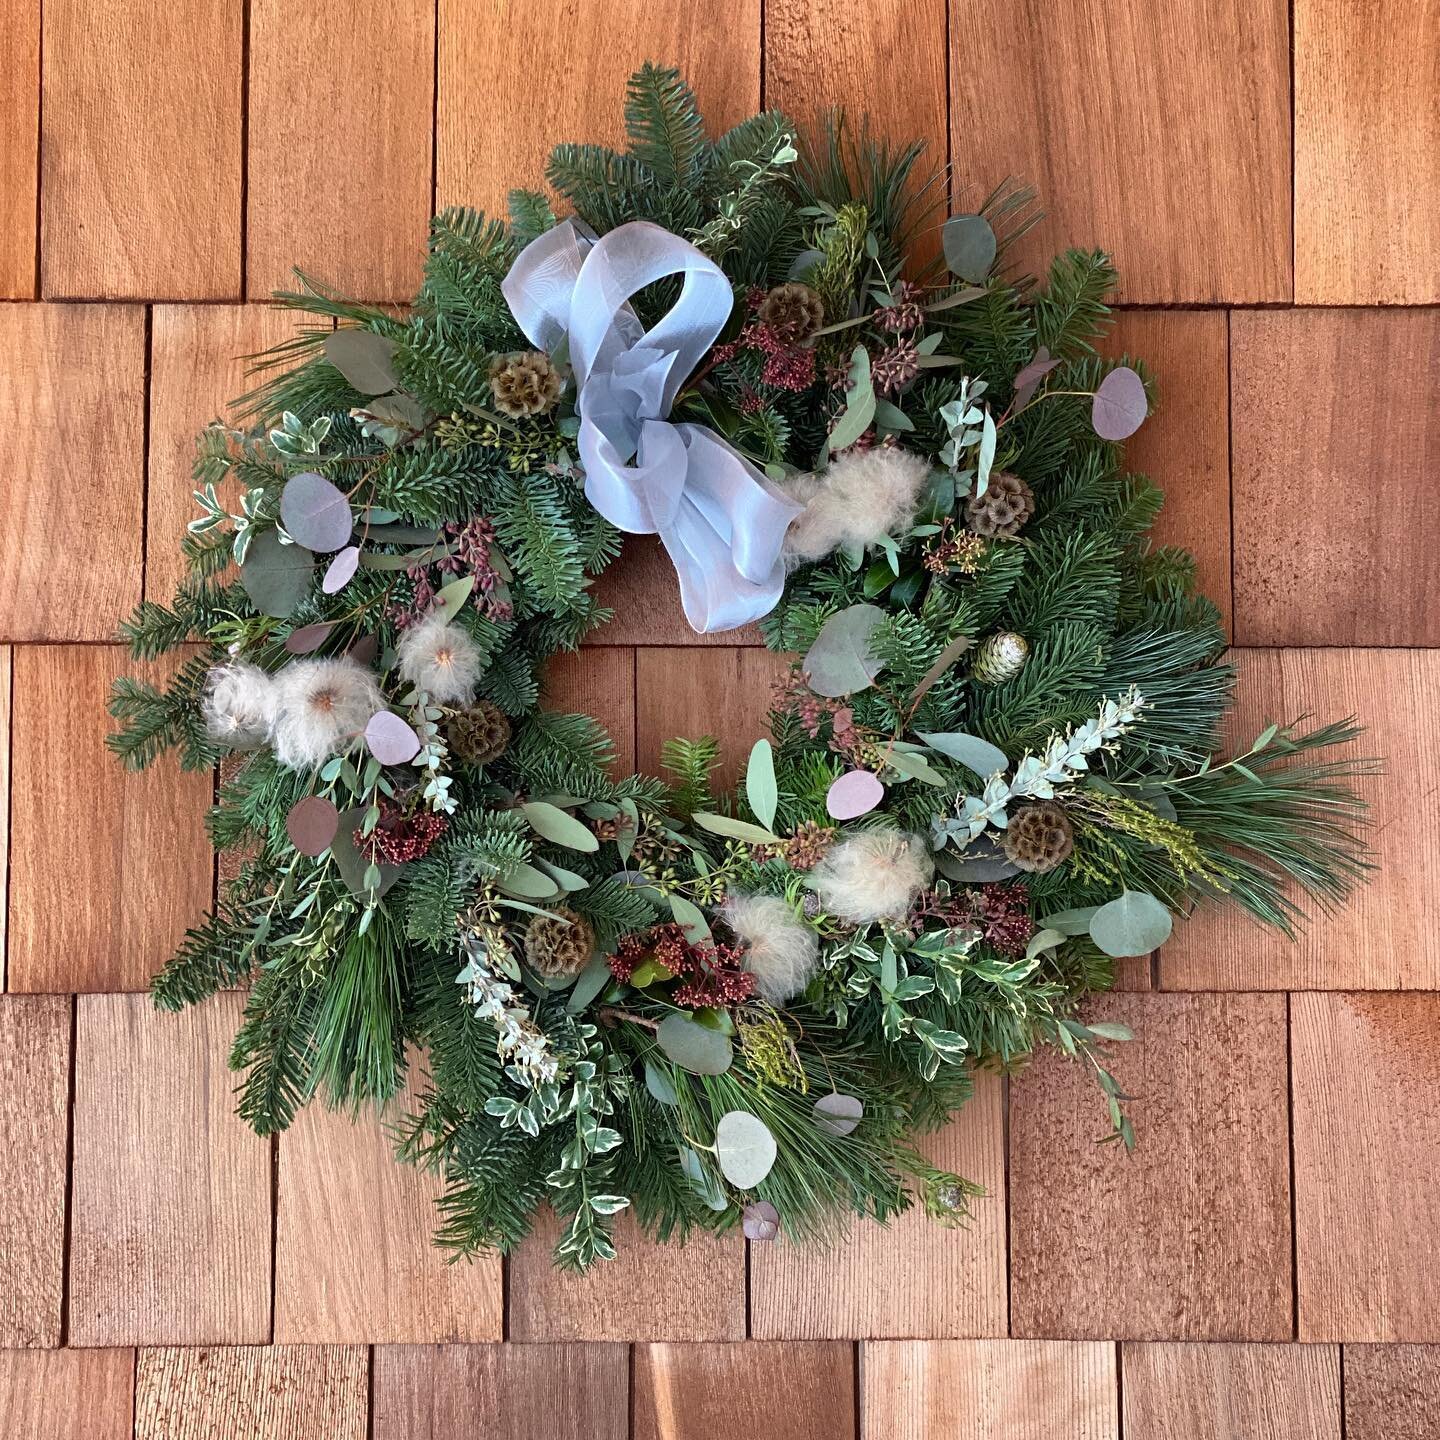 Happy Holidays from RBA! 🎅🏼

Wreath by our friends at  @botanica_design who seem to be making this yearly.  They&rsquo;re stunning.